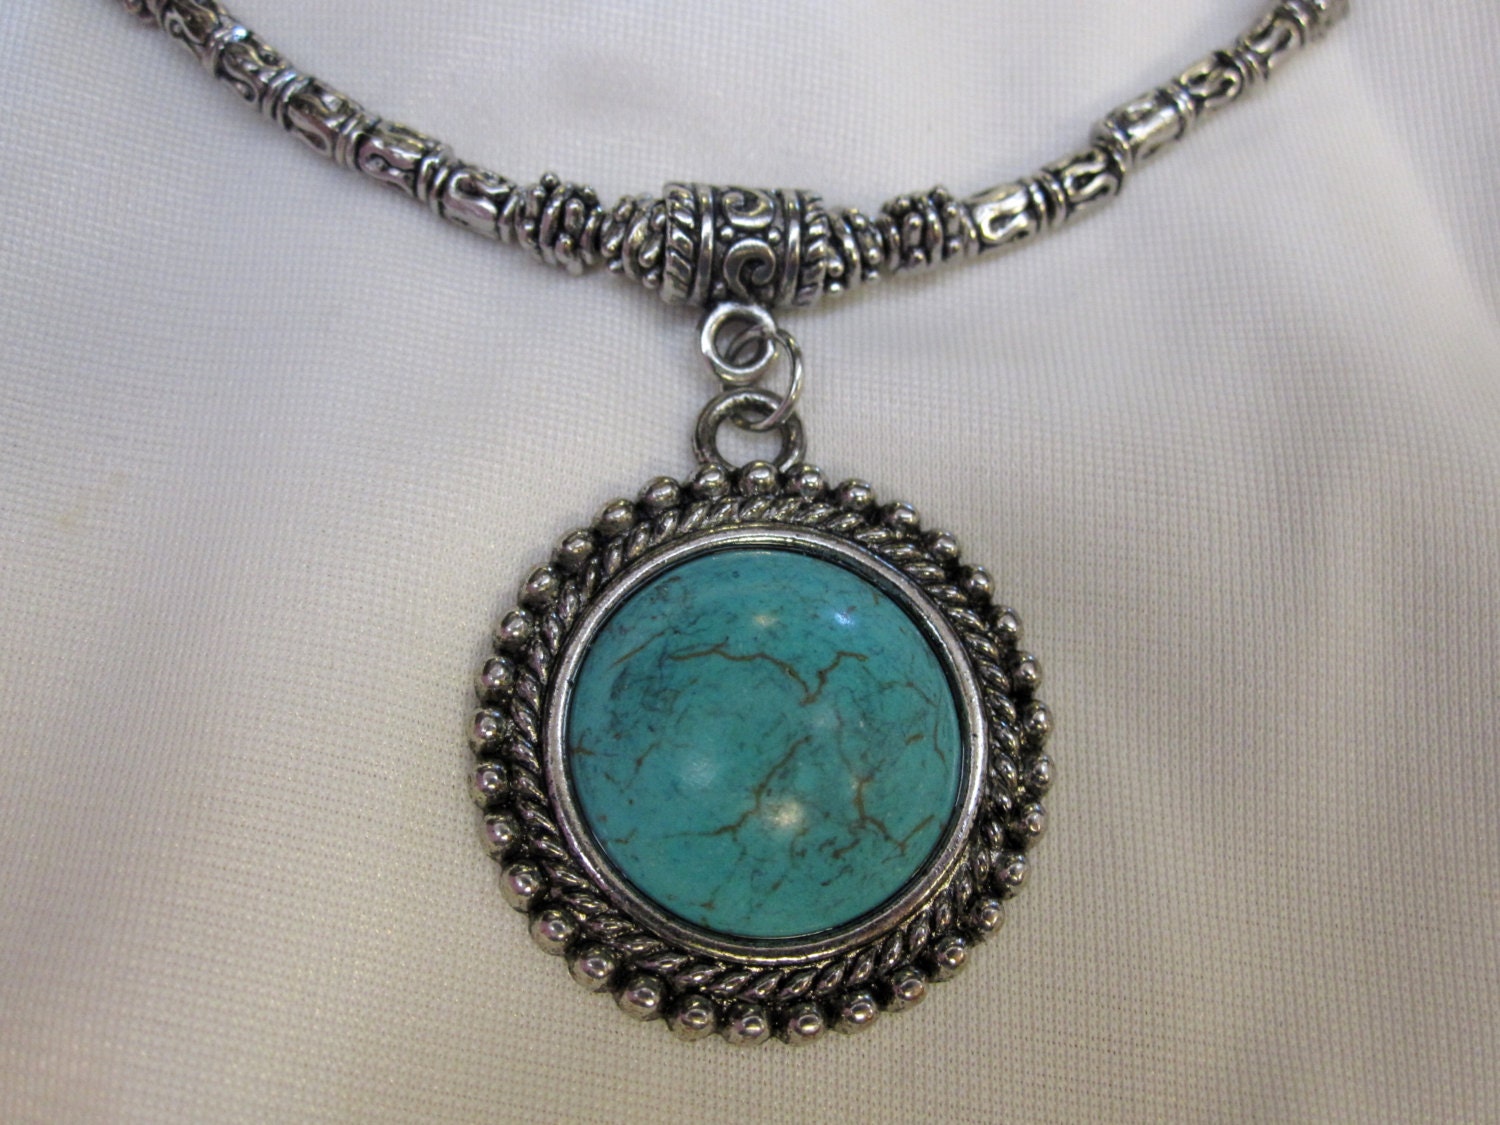 Beautiful Southwestern Turquoise Pendant by SimplyElegntNecklass